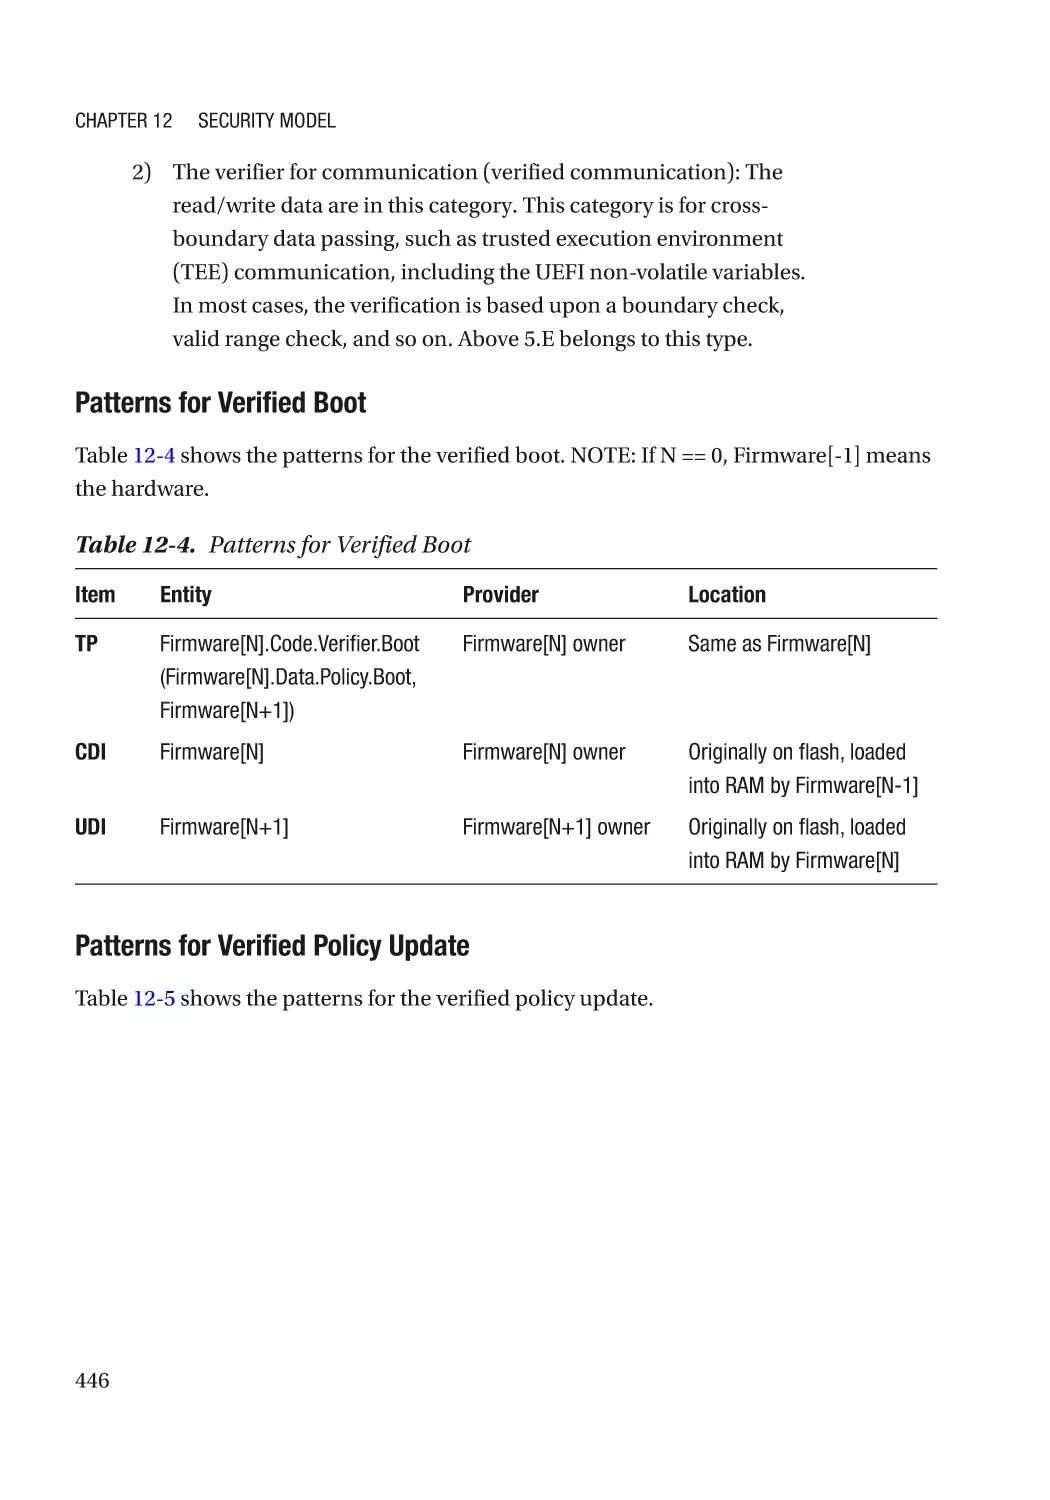 Patterns for Verified Boot
Patterns for Verified Policy Update